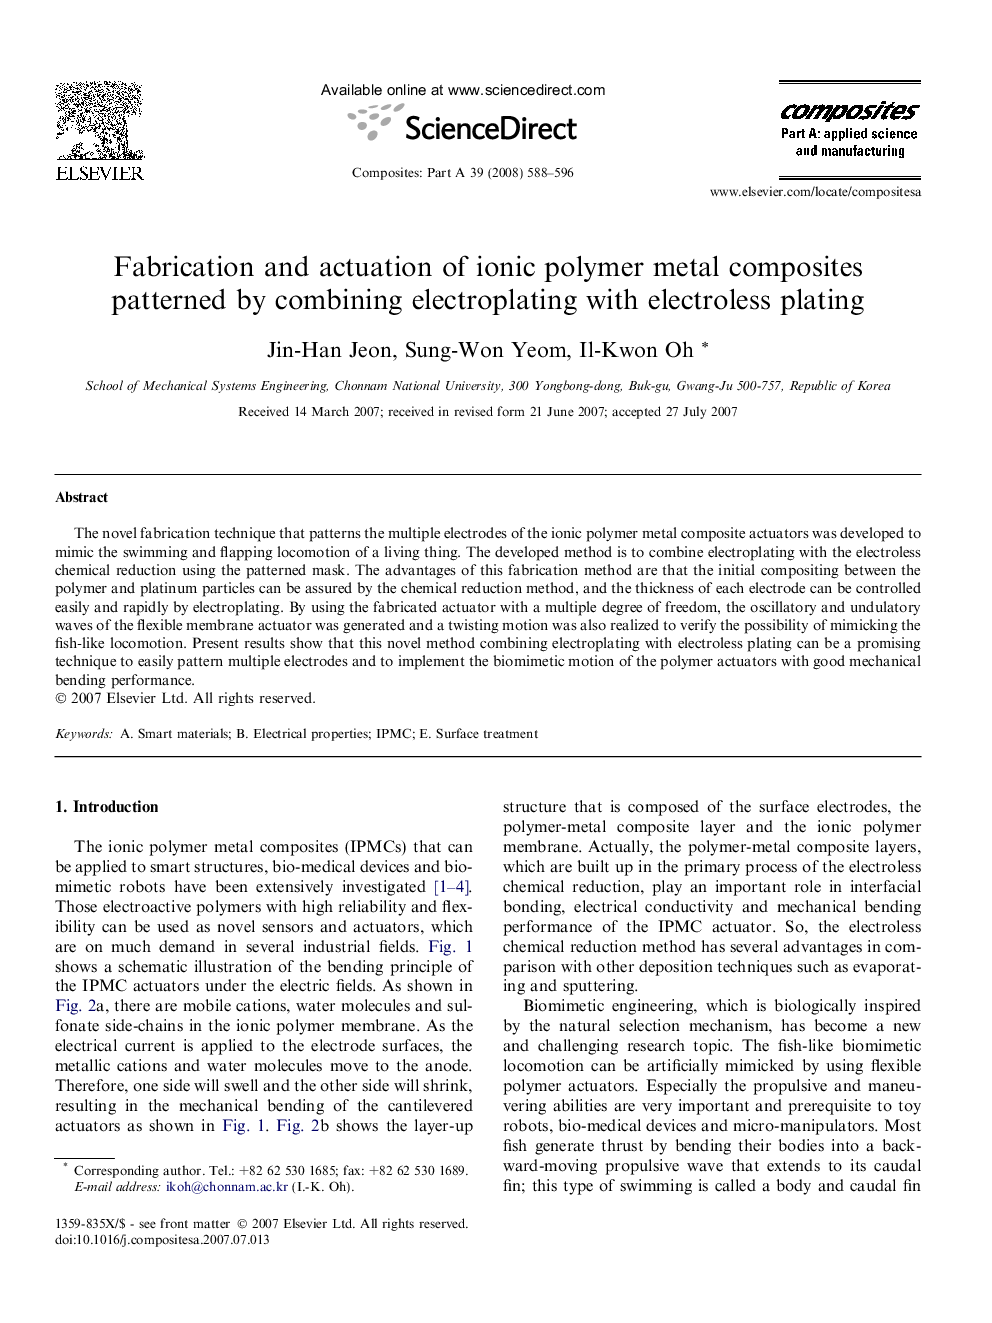 Fabrication and actuation of ionic polymer metal composites patterned by combining electroplating with electroless plating